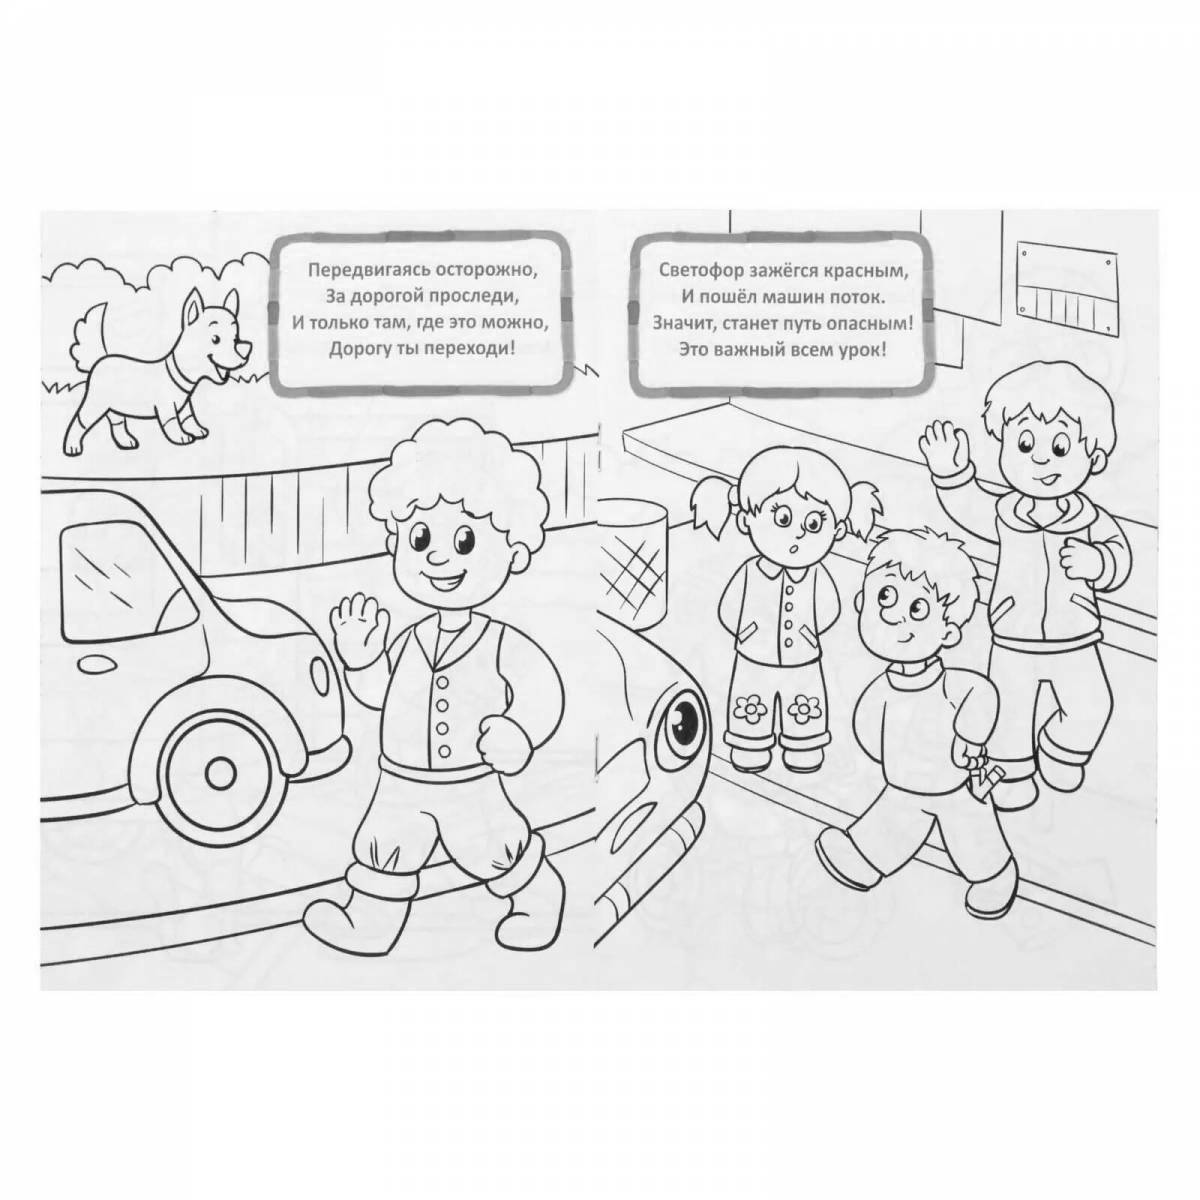 Coloring pages with dad and me for safer roads